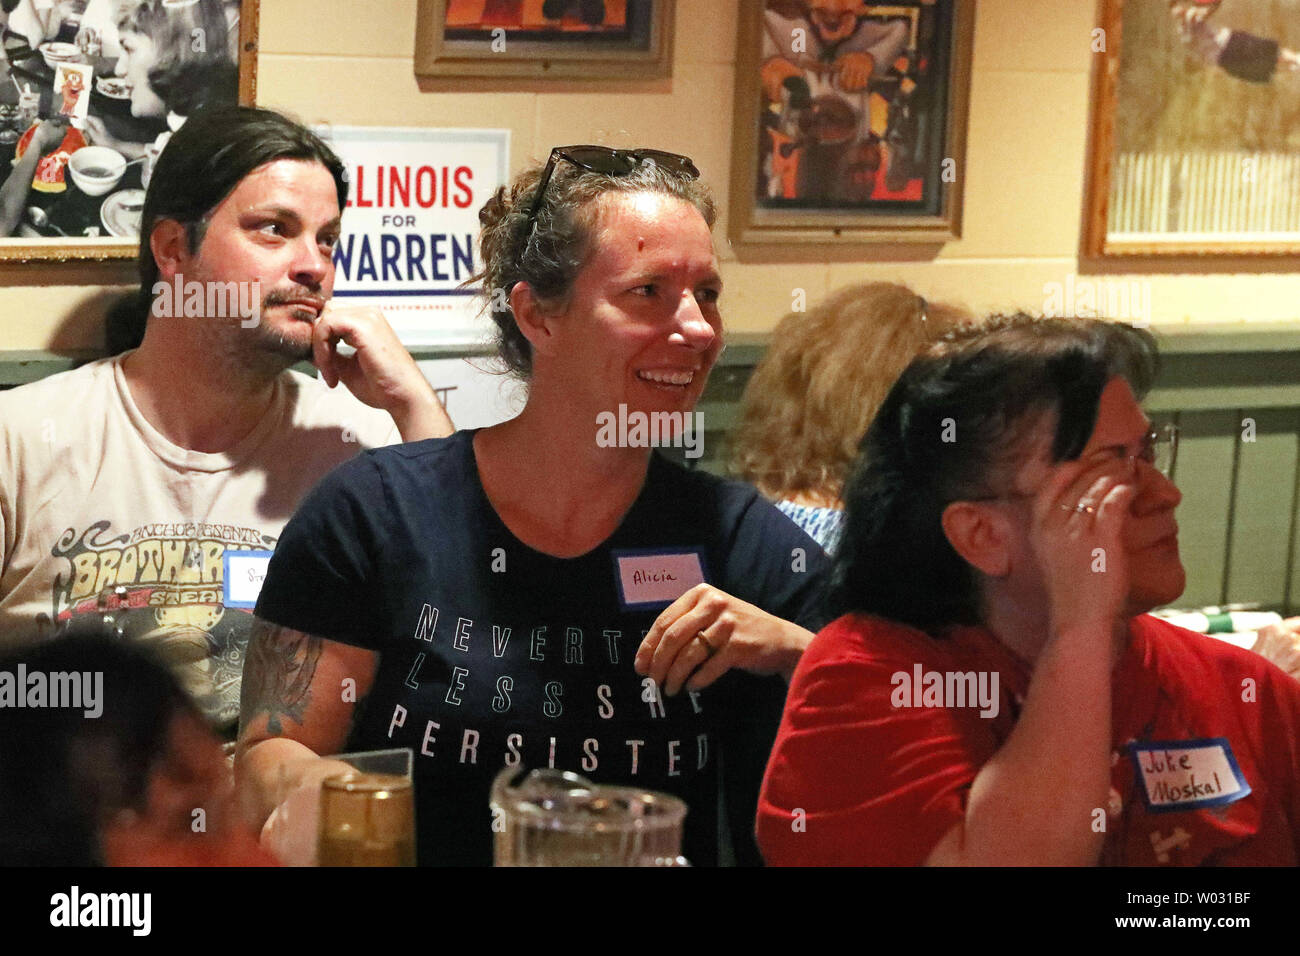 Wheaton, Illinois, USA. 26th June, 2019. Wednesday, June 26, 2019 - Wheaton, Illinois, U.S. - Senator Elizabeth Warren supporters STEVE ERICKSON, form left, ALICIA ERICKSON and JULIE MOSKAL watch the First Democratic Presidential Debate at Gino's East restaurant in Wheaton, Illinois during a watch party sponsored by grass roots organization Indivisible DuPage. Credit: H. Rick Bamman/ZUMA Wire/Alamy Live News Stock Photo